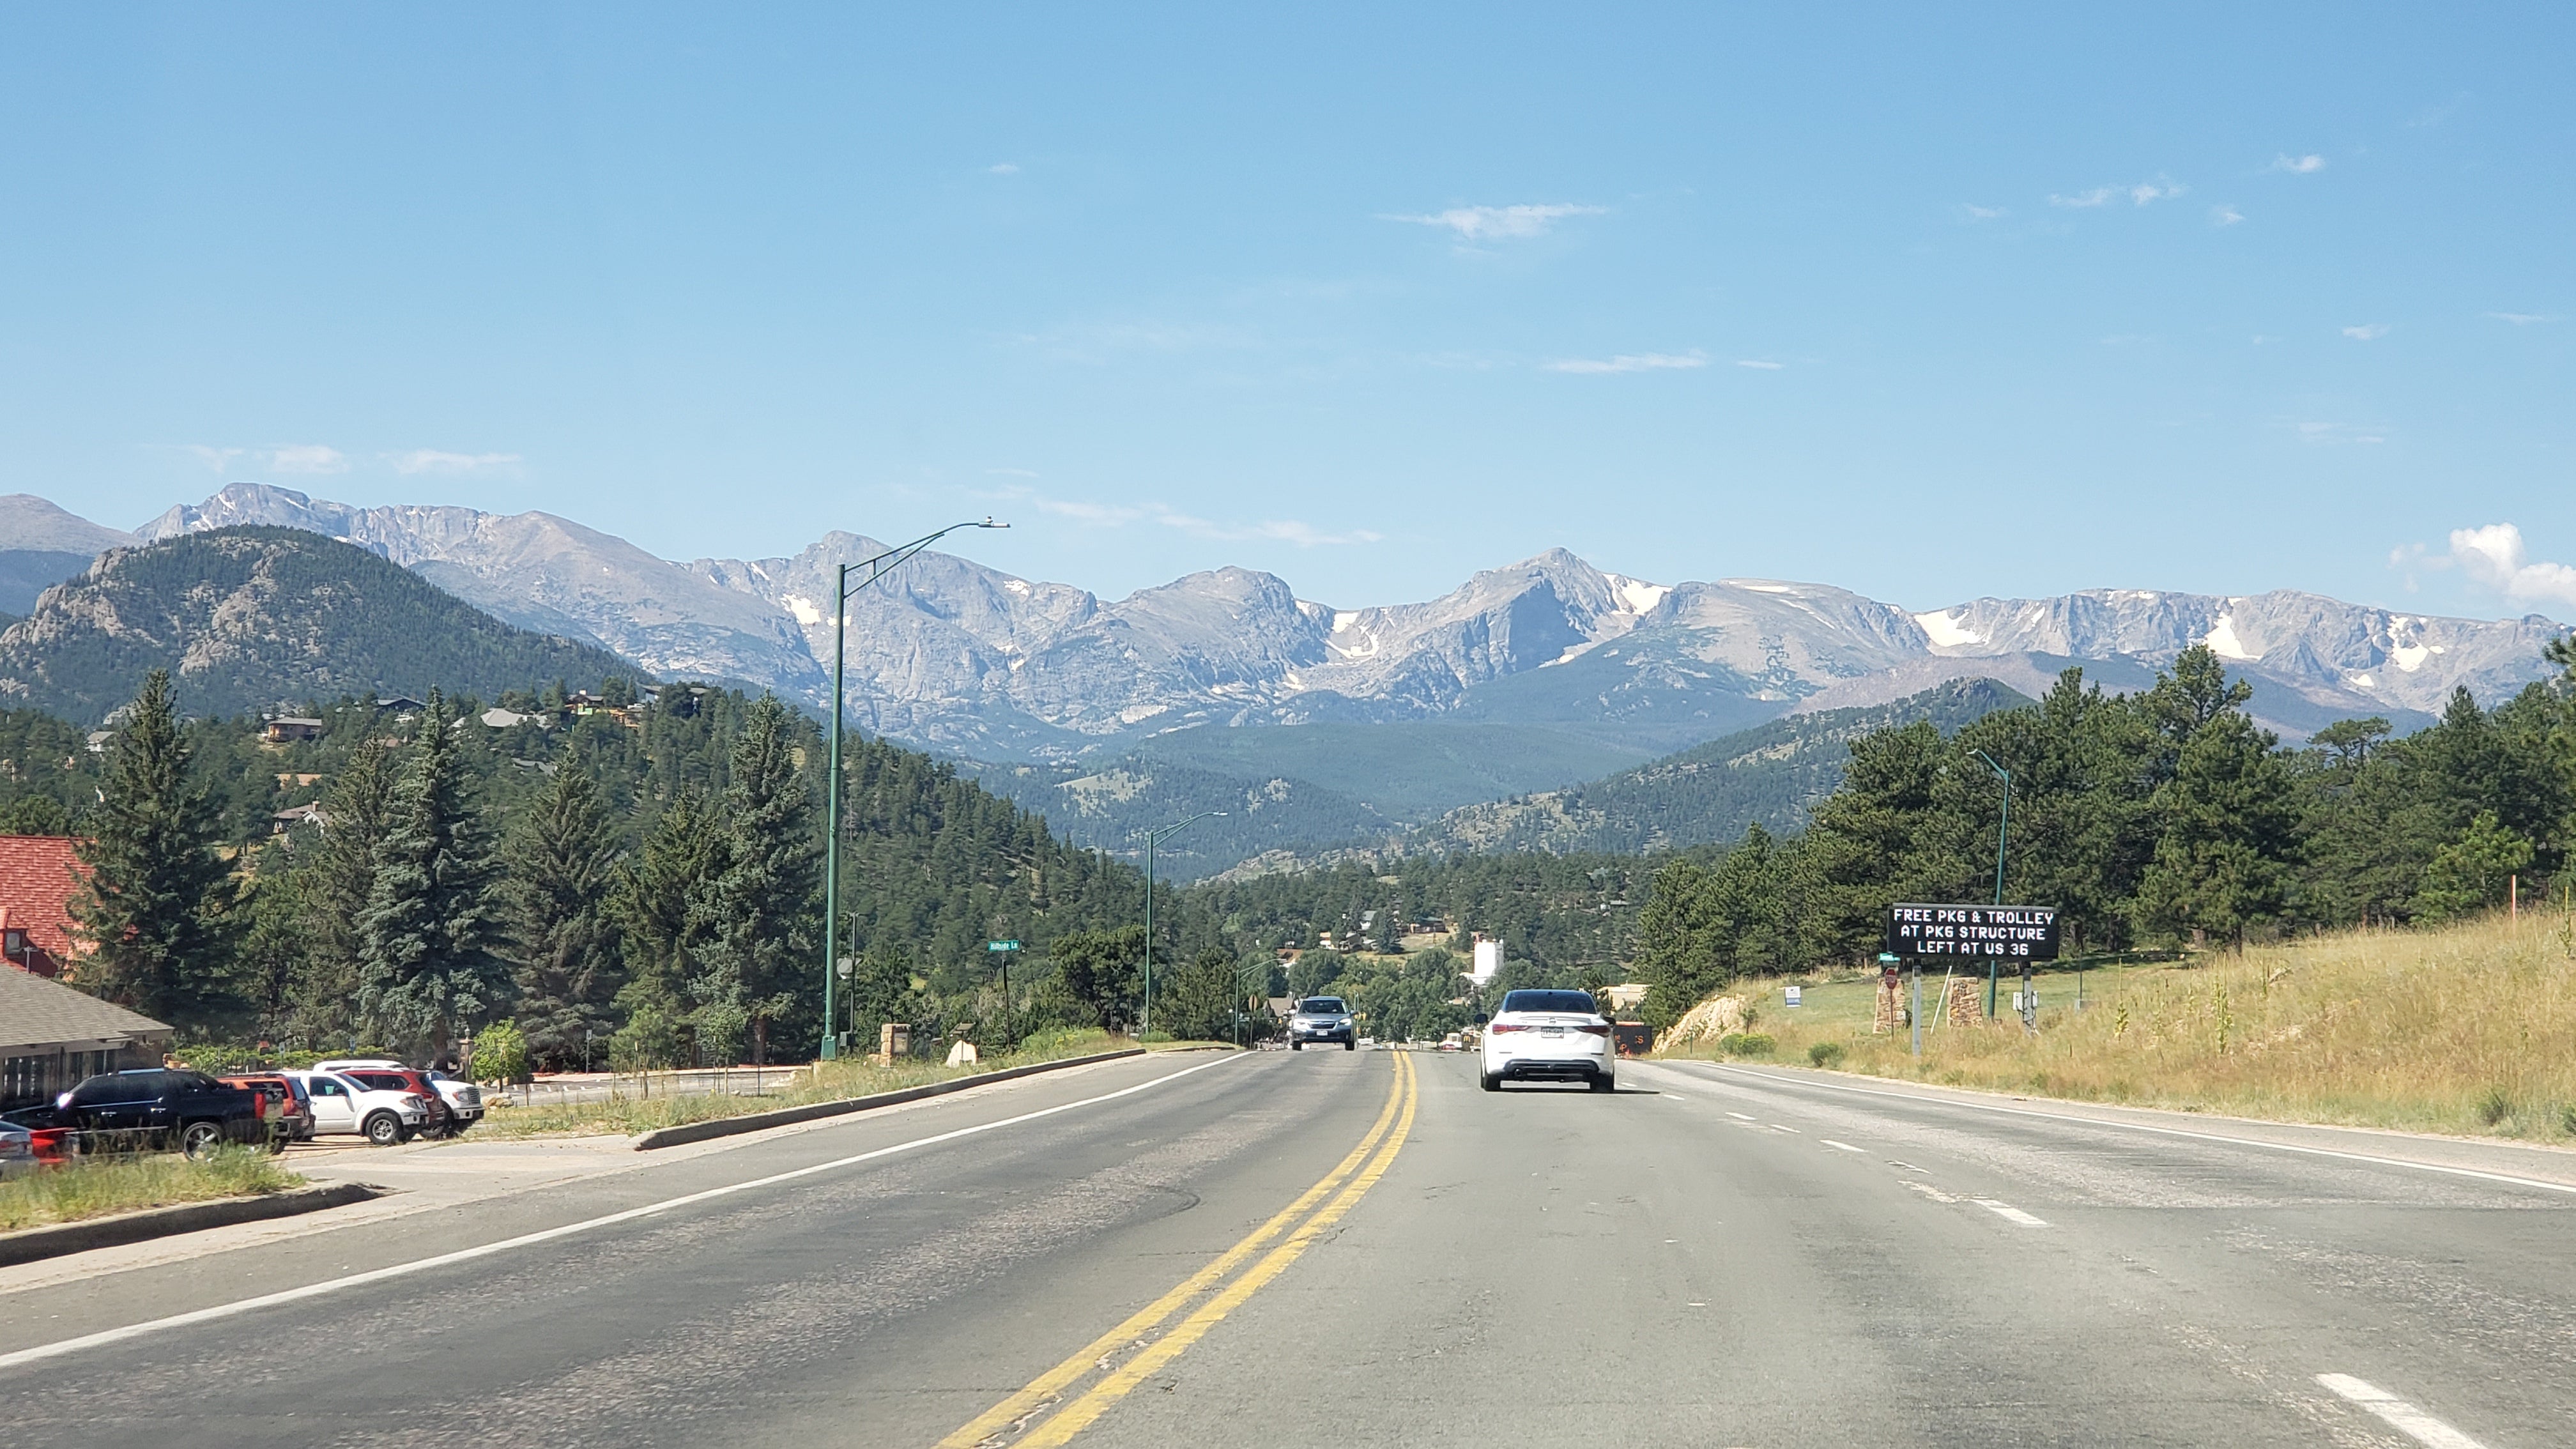 The scenic drive into Rocky Mountain National Park